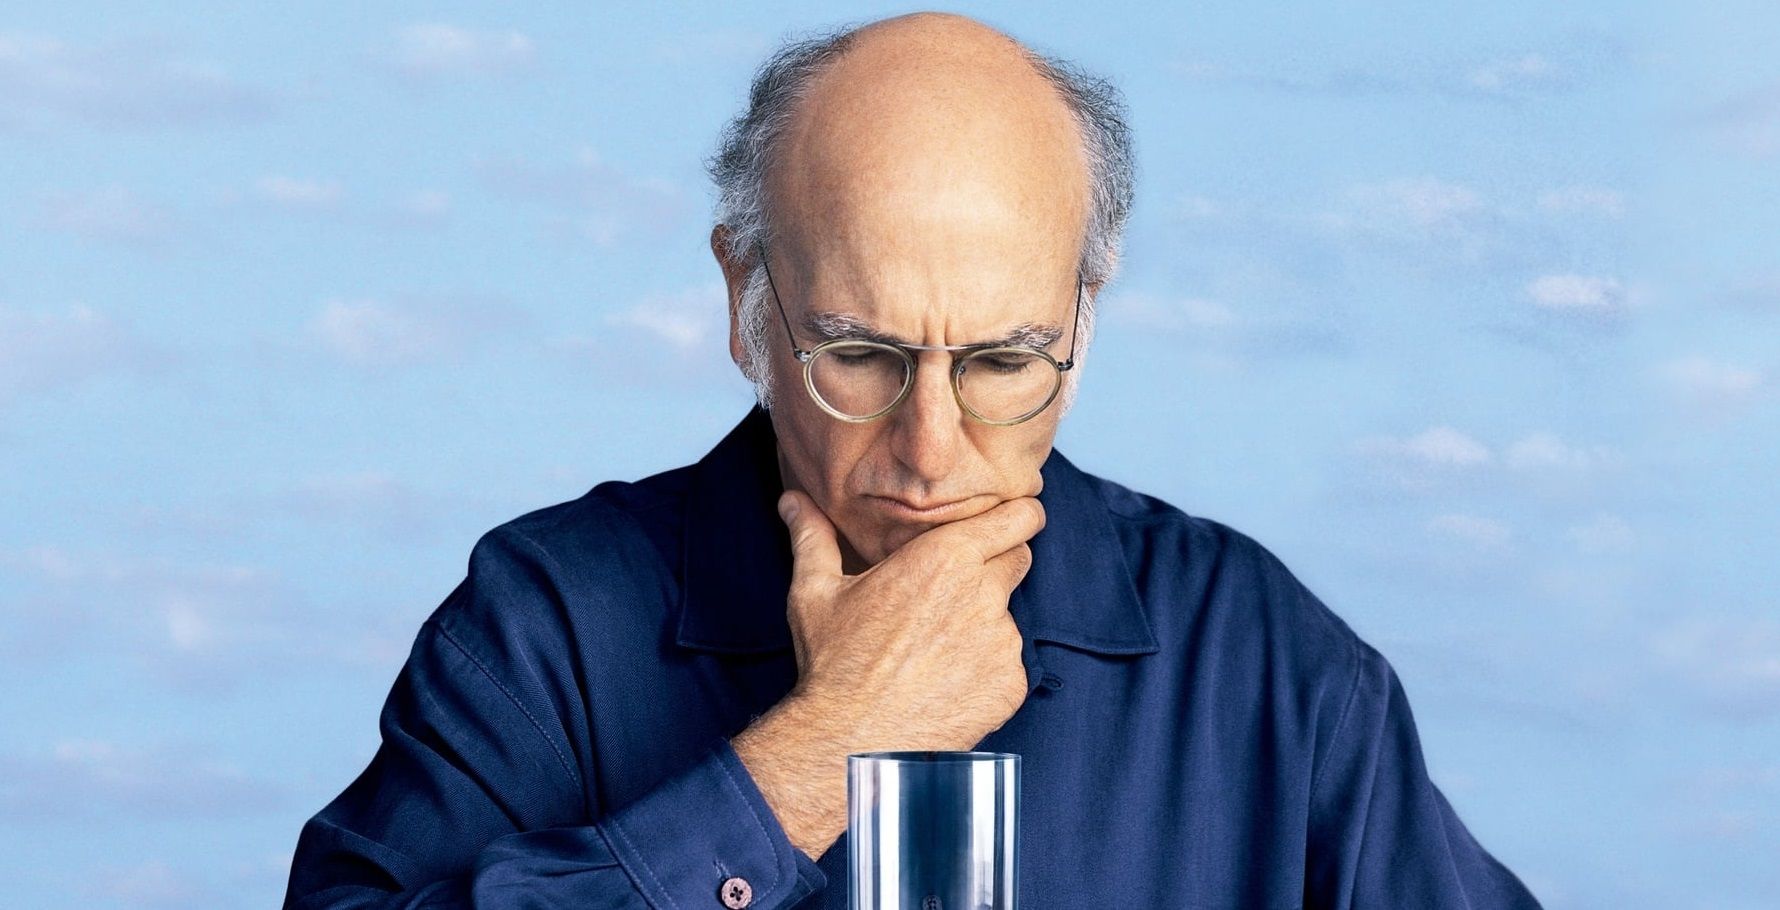 10 Quotes From Curb Your Enthusiasm That Are Still Hilarious Today